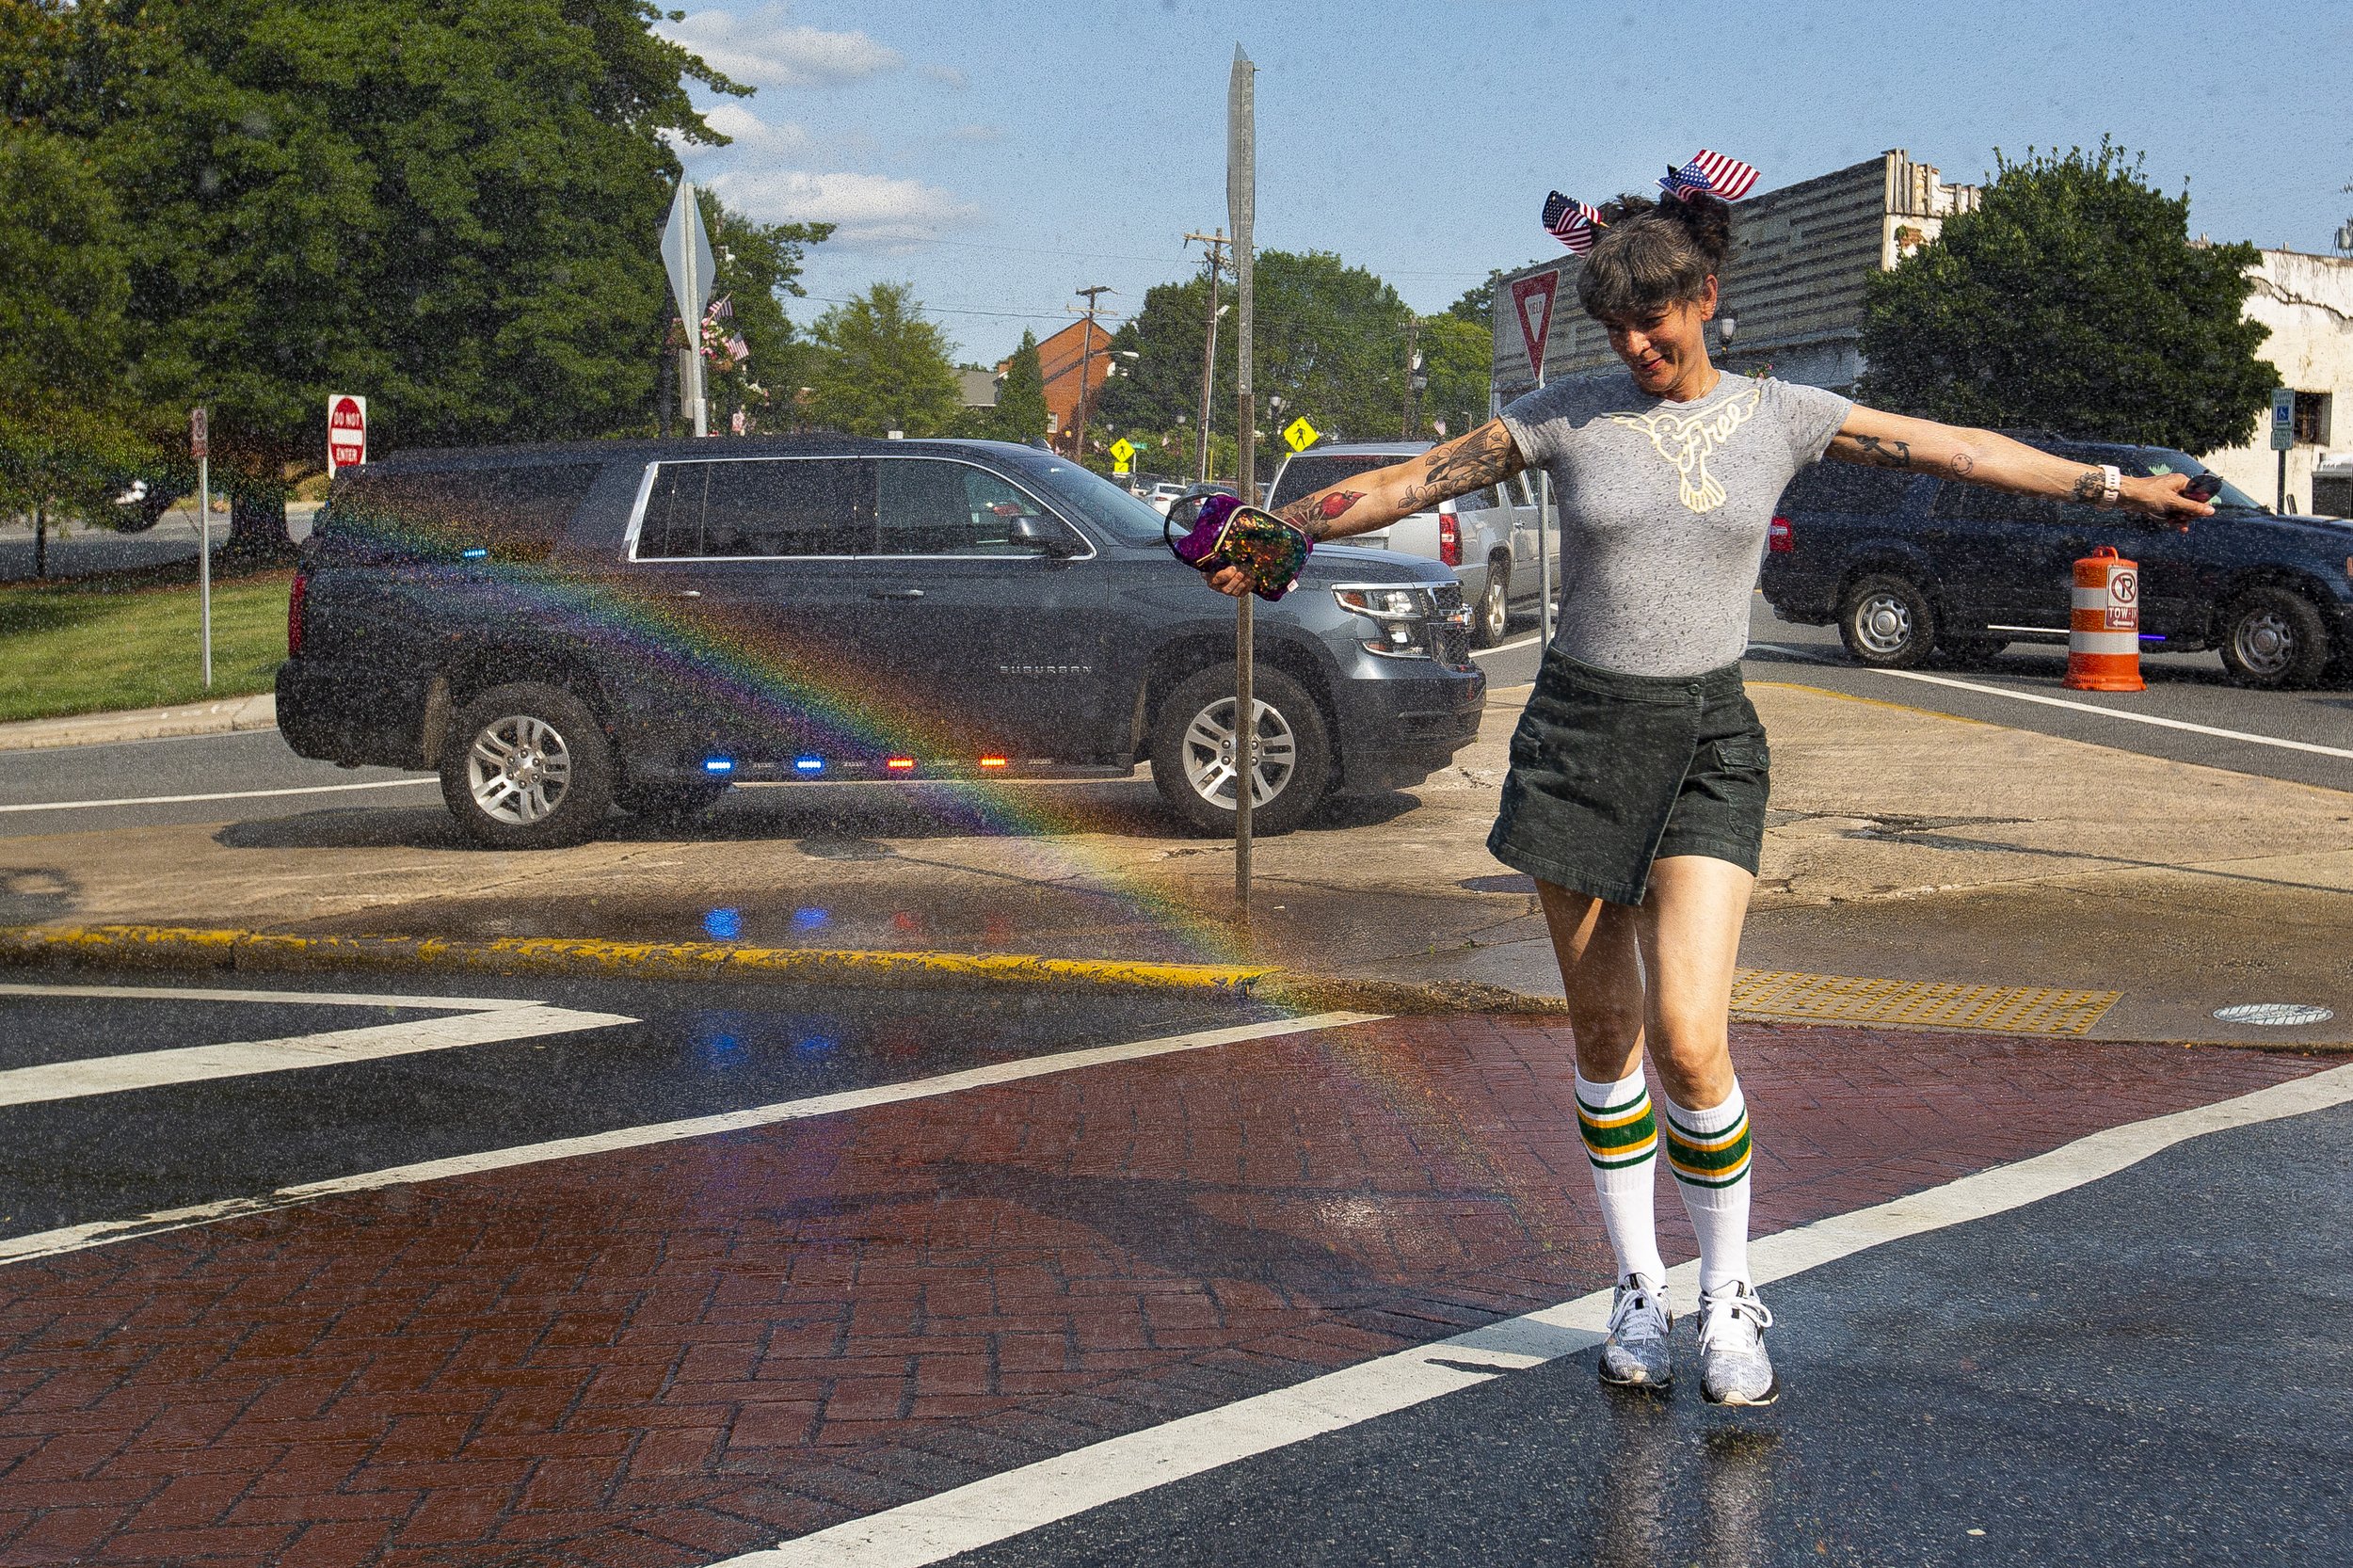  Sara Cox dances through a rainbow refracted by water sprayed by the Greensboro Fire department during the Fun Fourth in Downtown Greensboro, N.C., on Saturday, July 3, 2021.   The Fun Fourth festival is took place along Elm Street, from February One